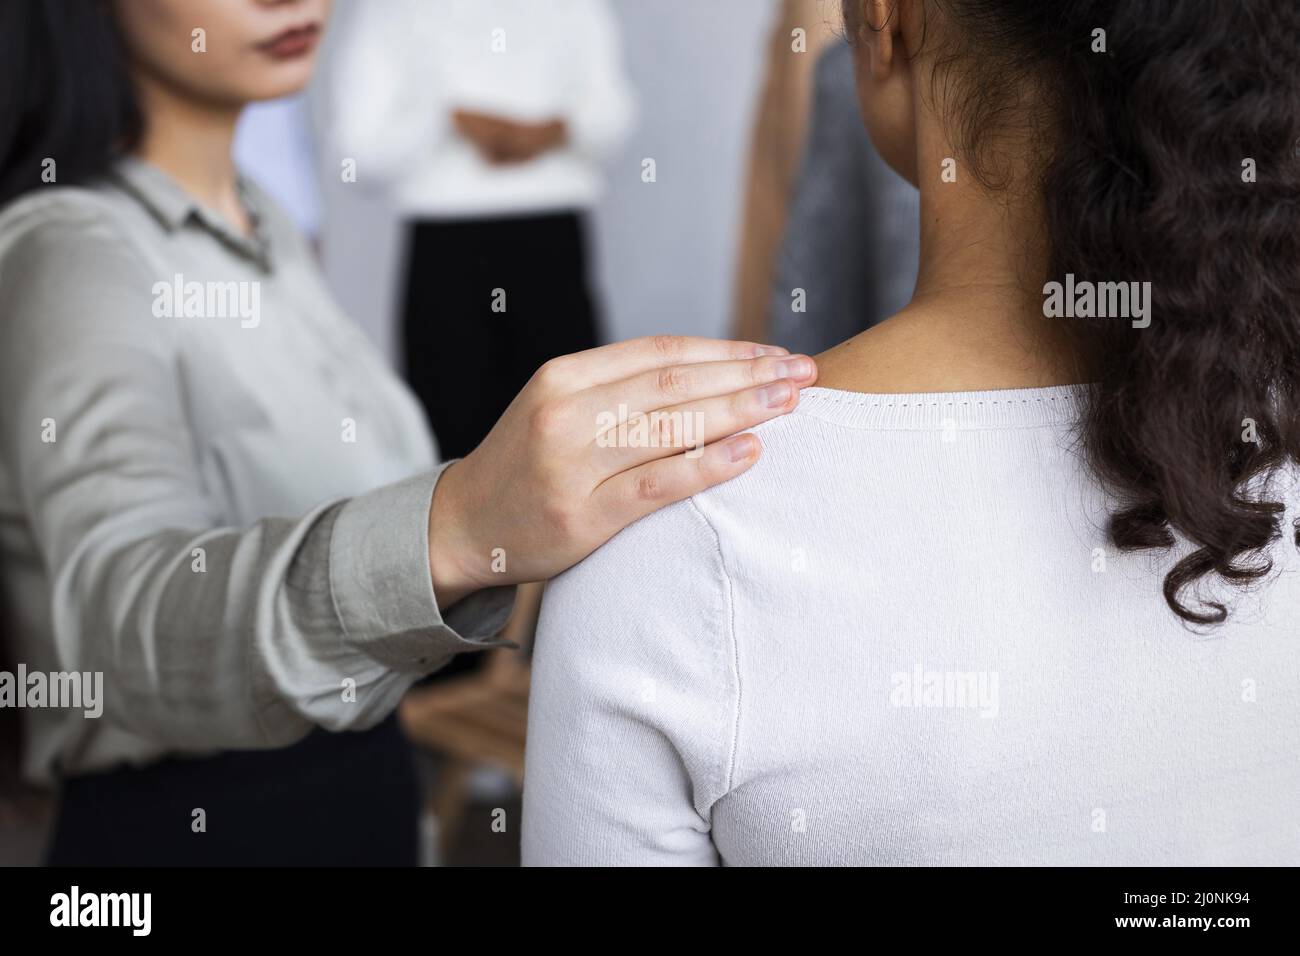 Woman consoling person group therapy session. High quality and resolution beautiful photo concept Stock Photo